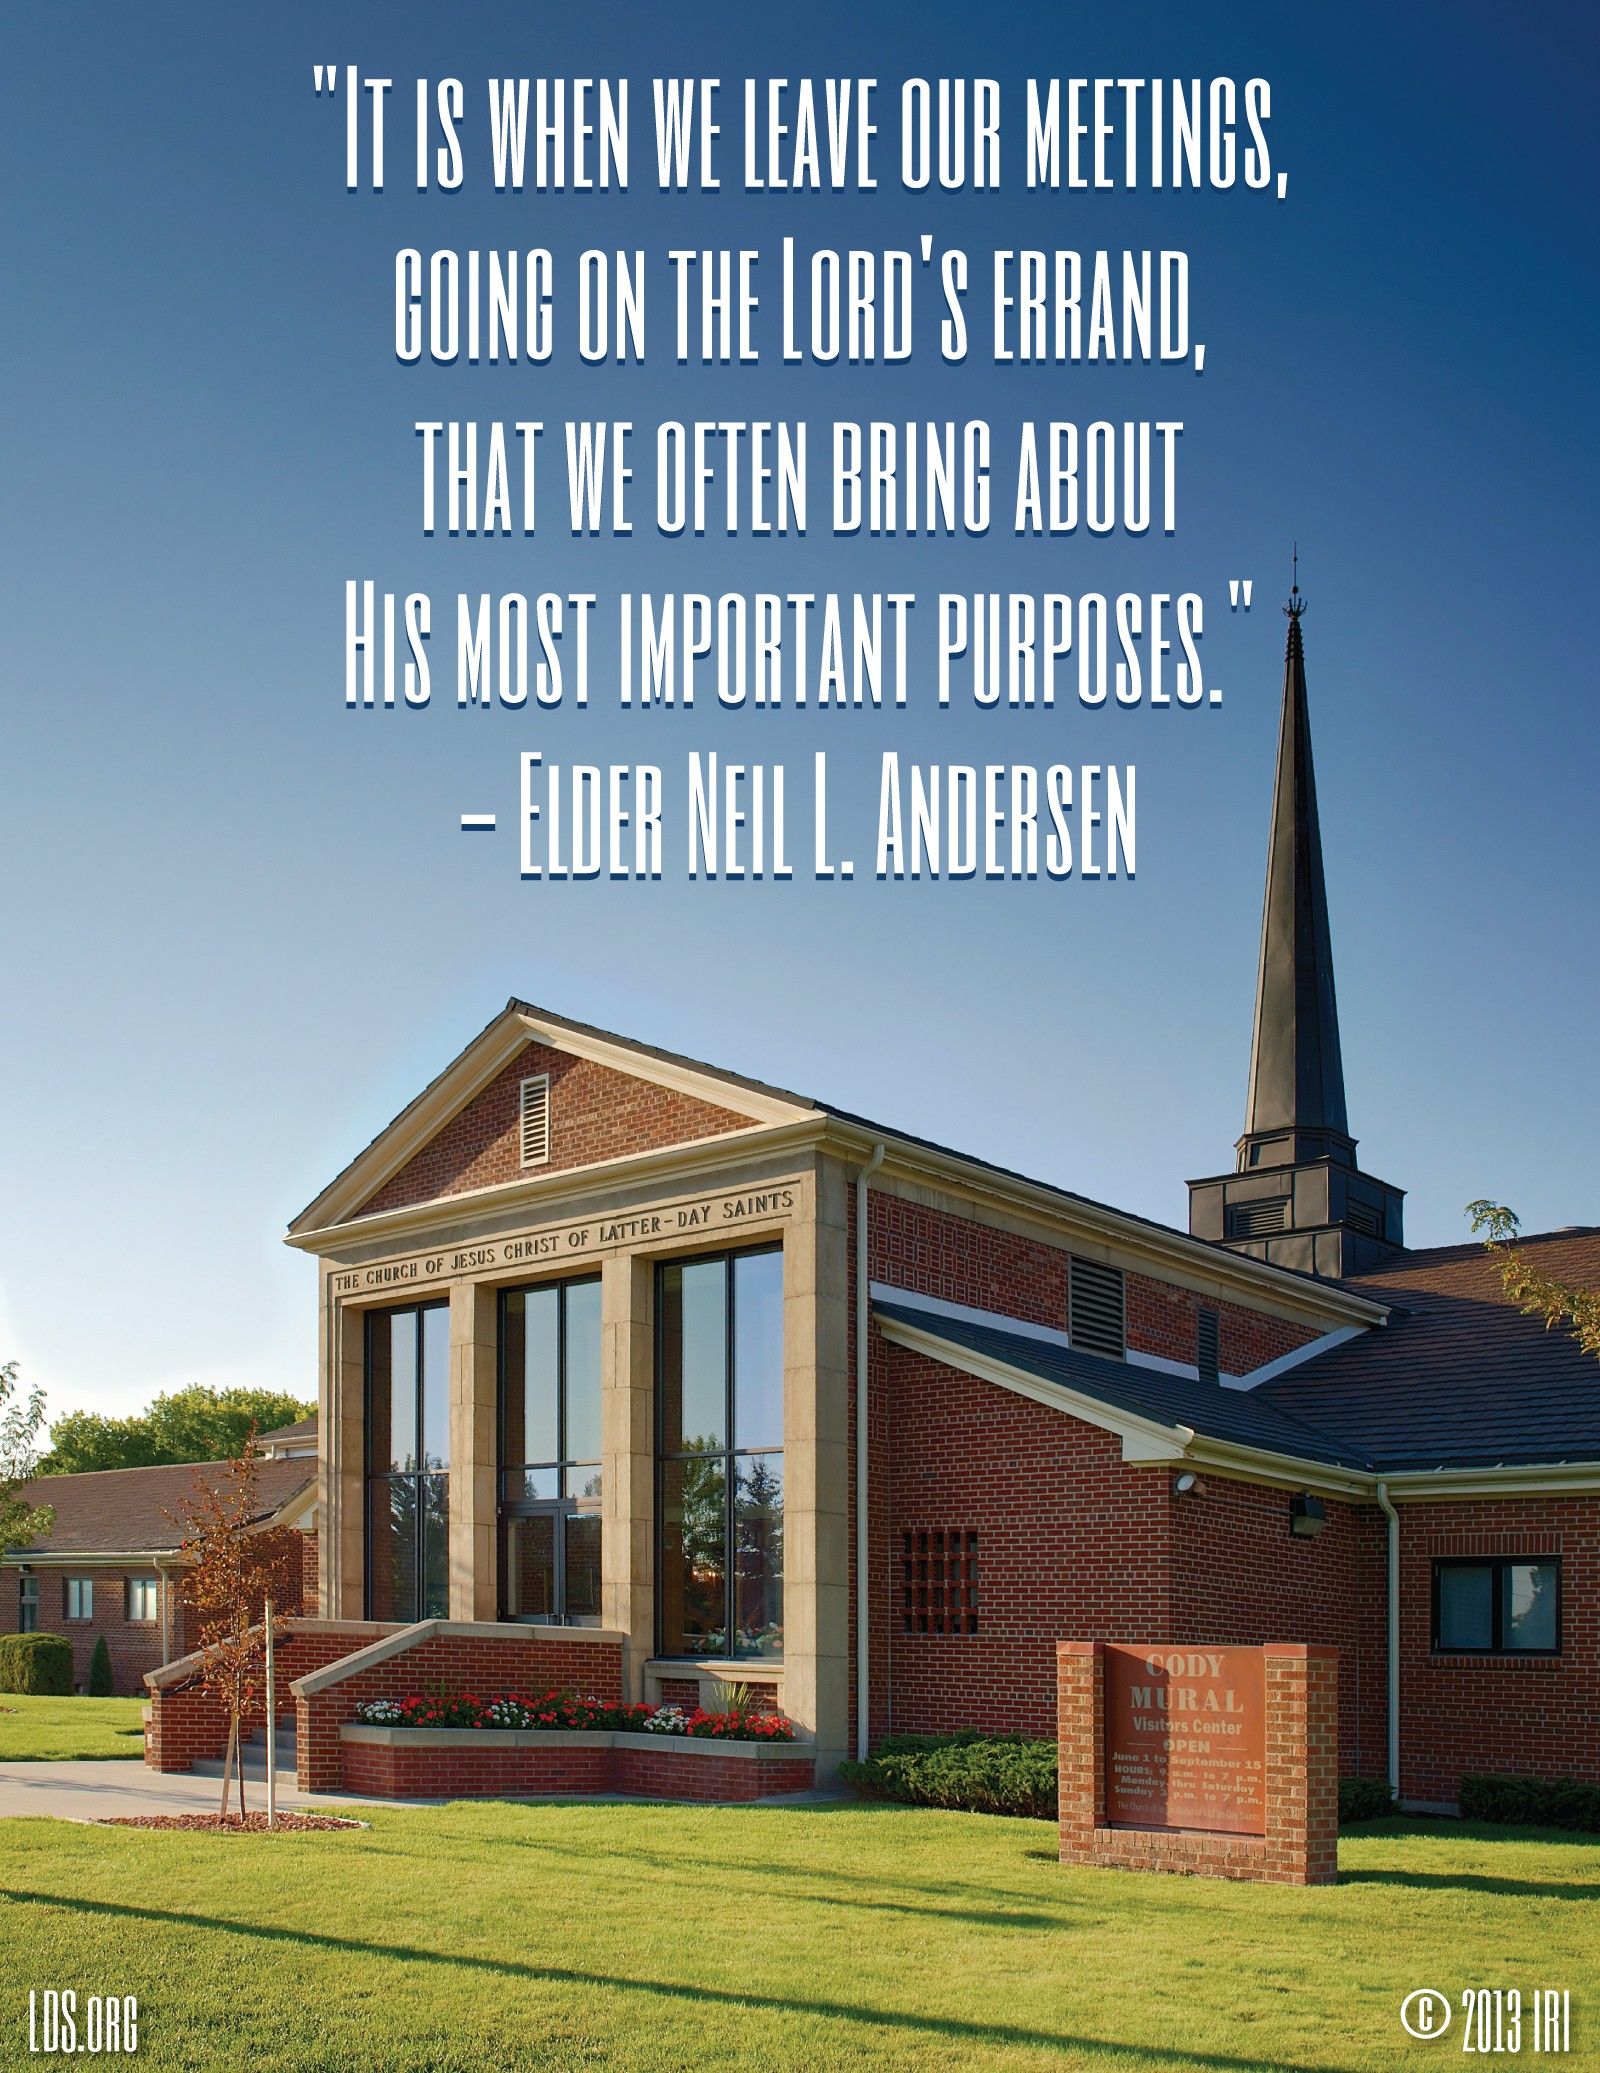 “It is when we leave our meetings, going on the Lord’s errand, that we often bring about His most important purposes.”—Elder Neil L. Andersen, “A Spiritual Work” © undefined ipCode 1.